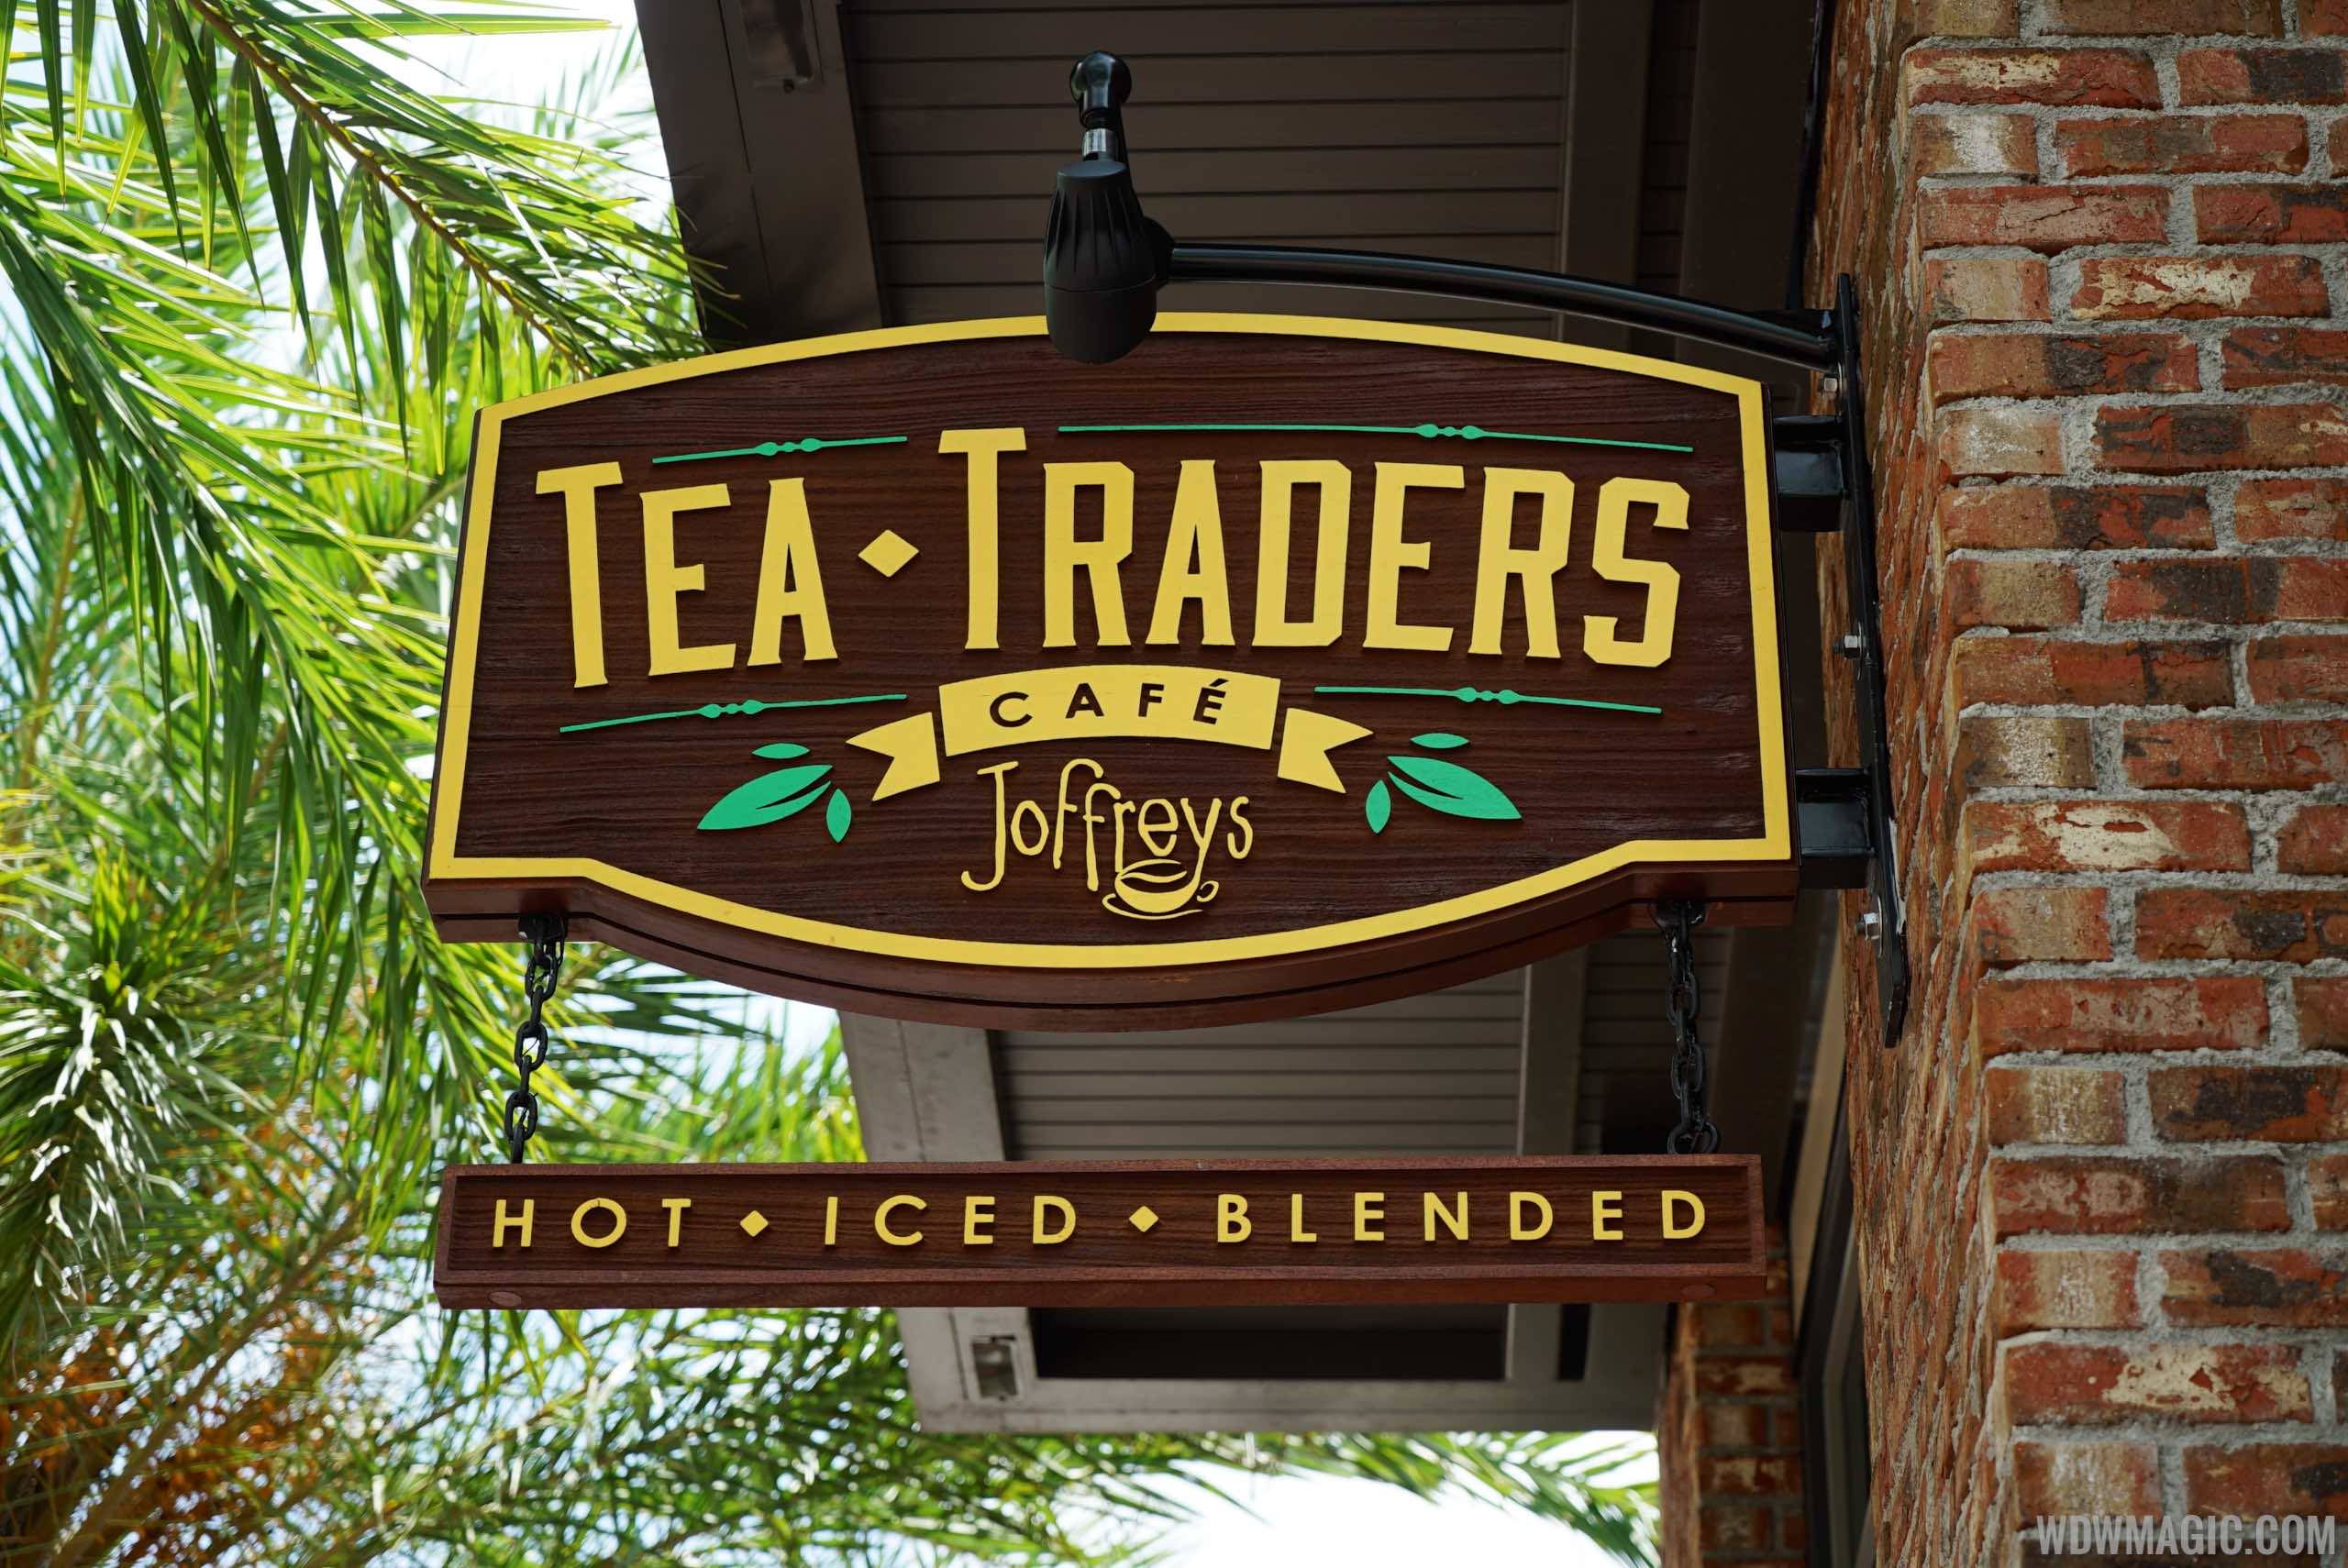 PHOTOS - The Tea Traders Cafe now open at Disney Springs The Landing